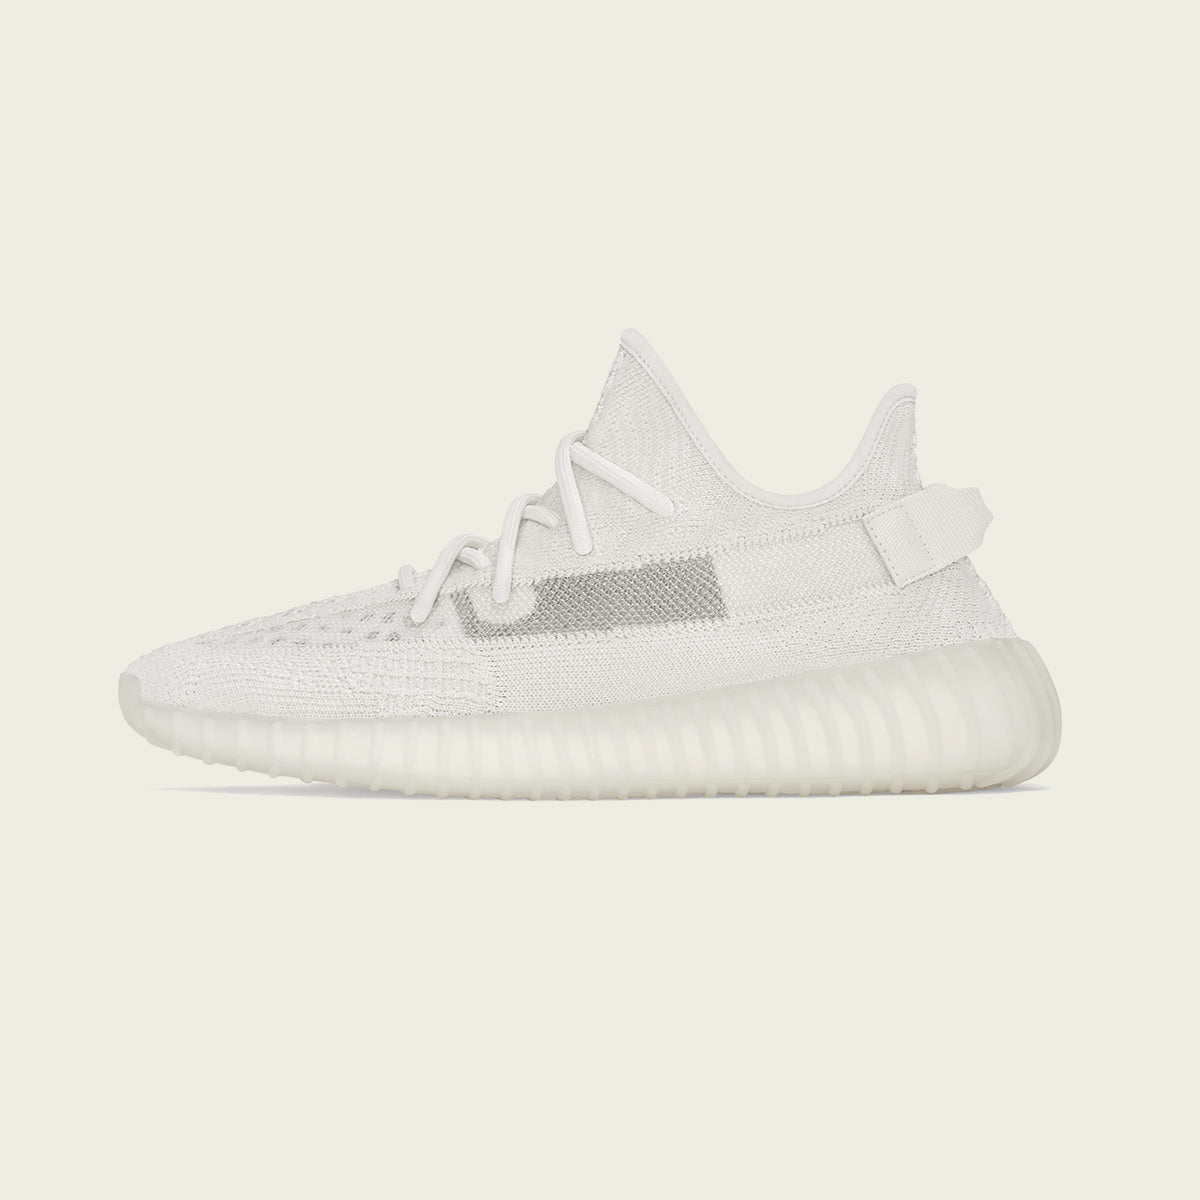  adidas Men's Yeezy Boost 350 V2, White/CORE Black/RED, 9.5 M  US